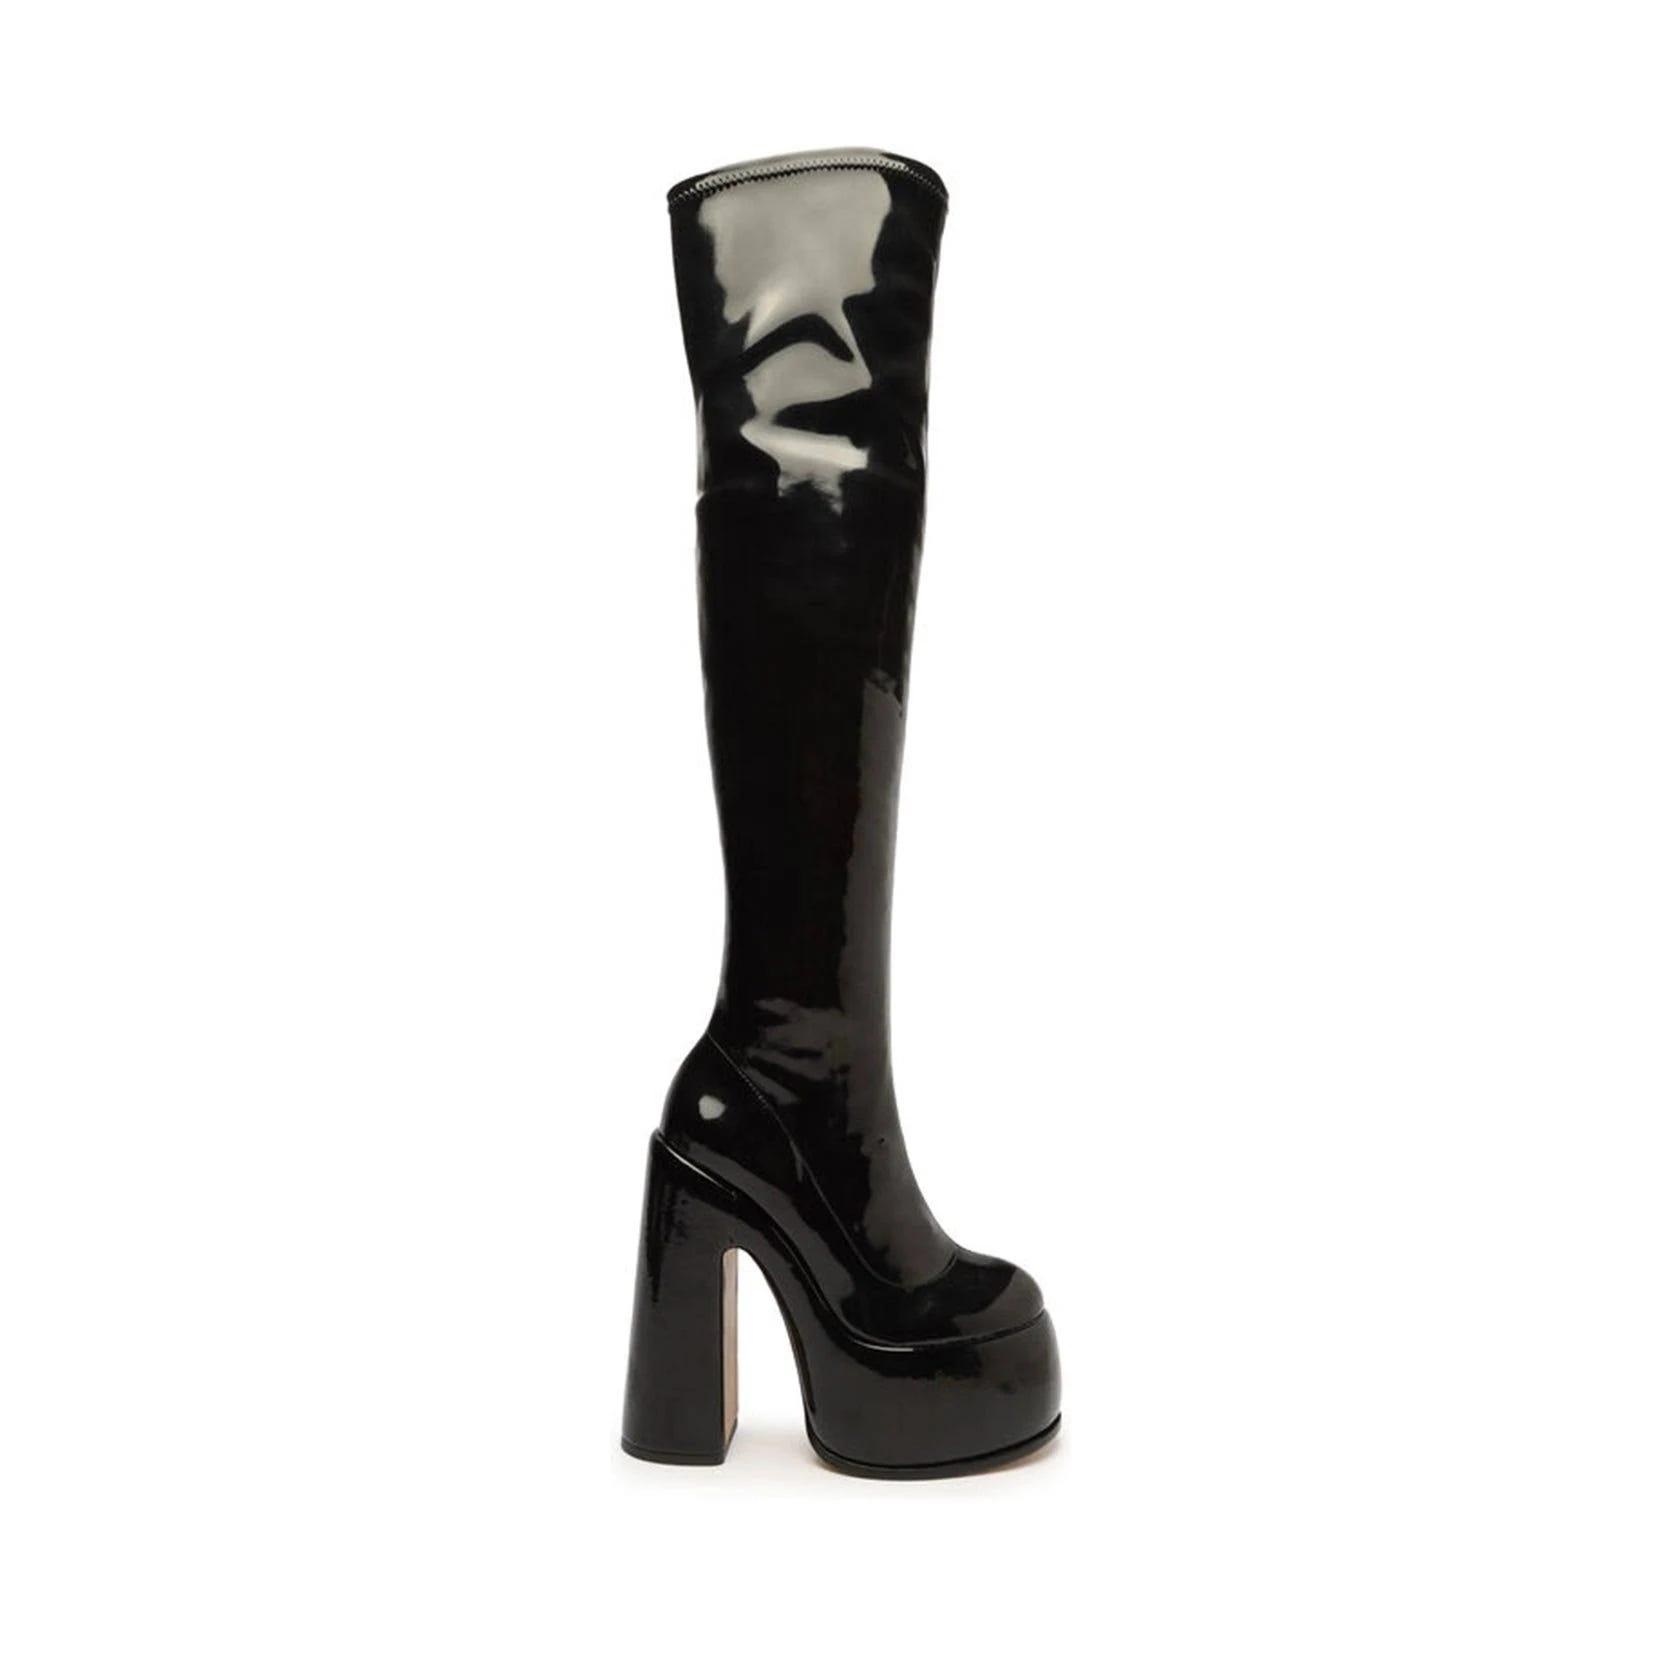 Stylish Black Leather Over-the-Knee Boot | Image